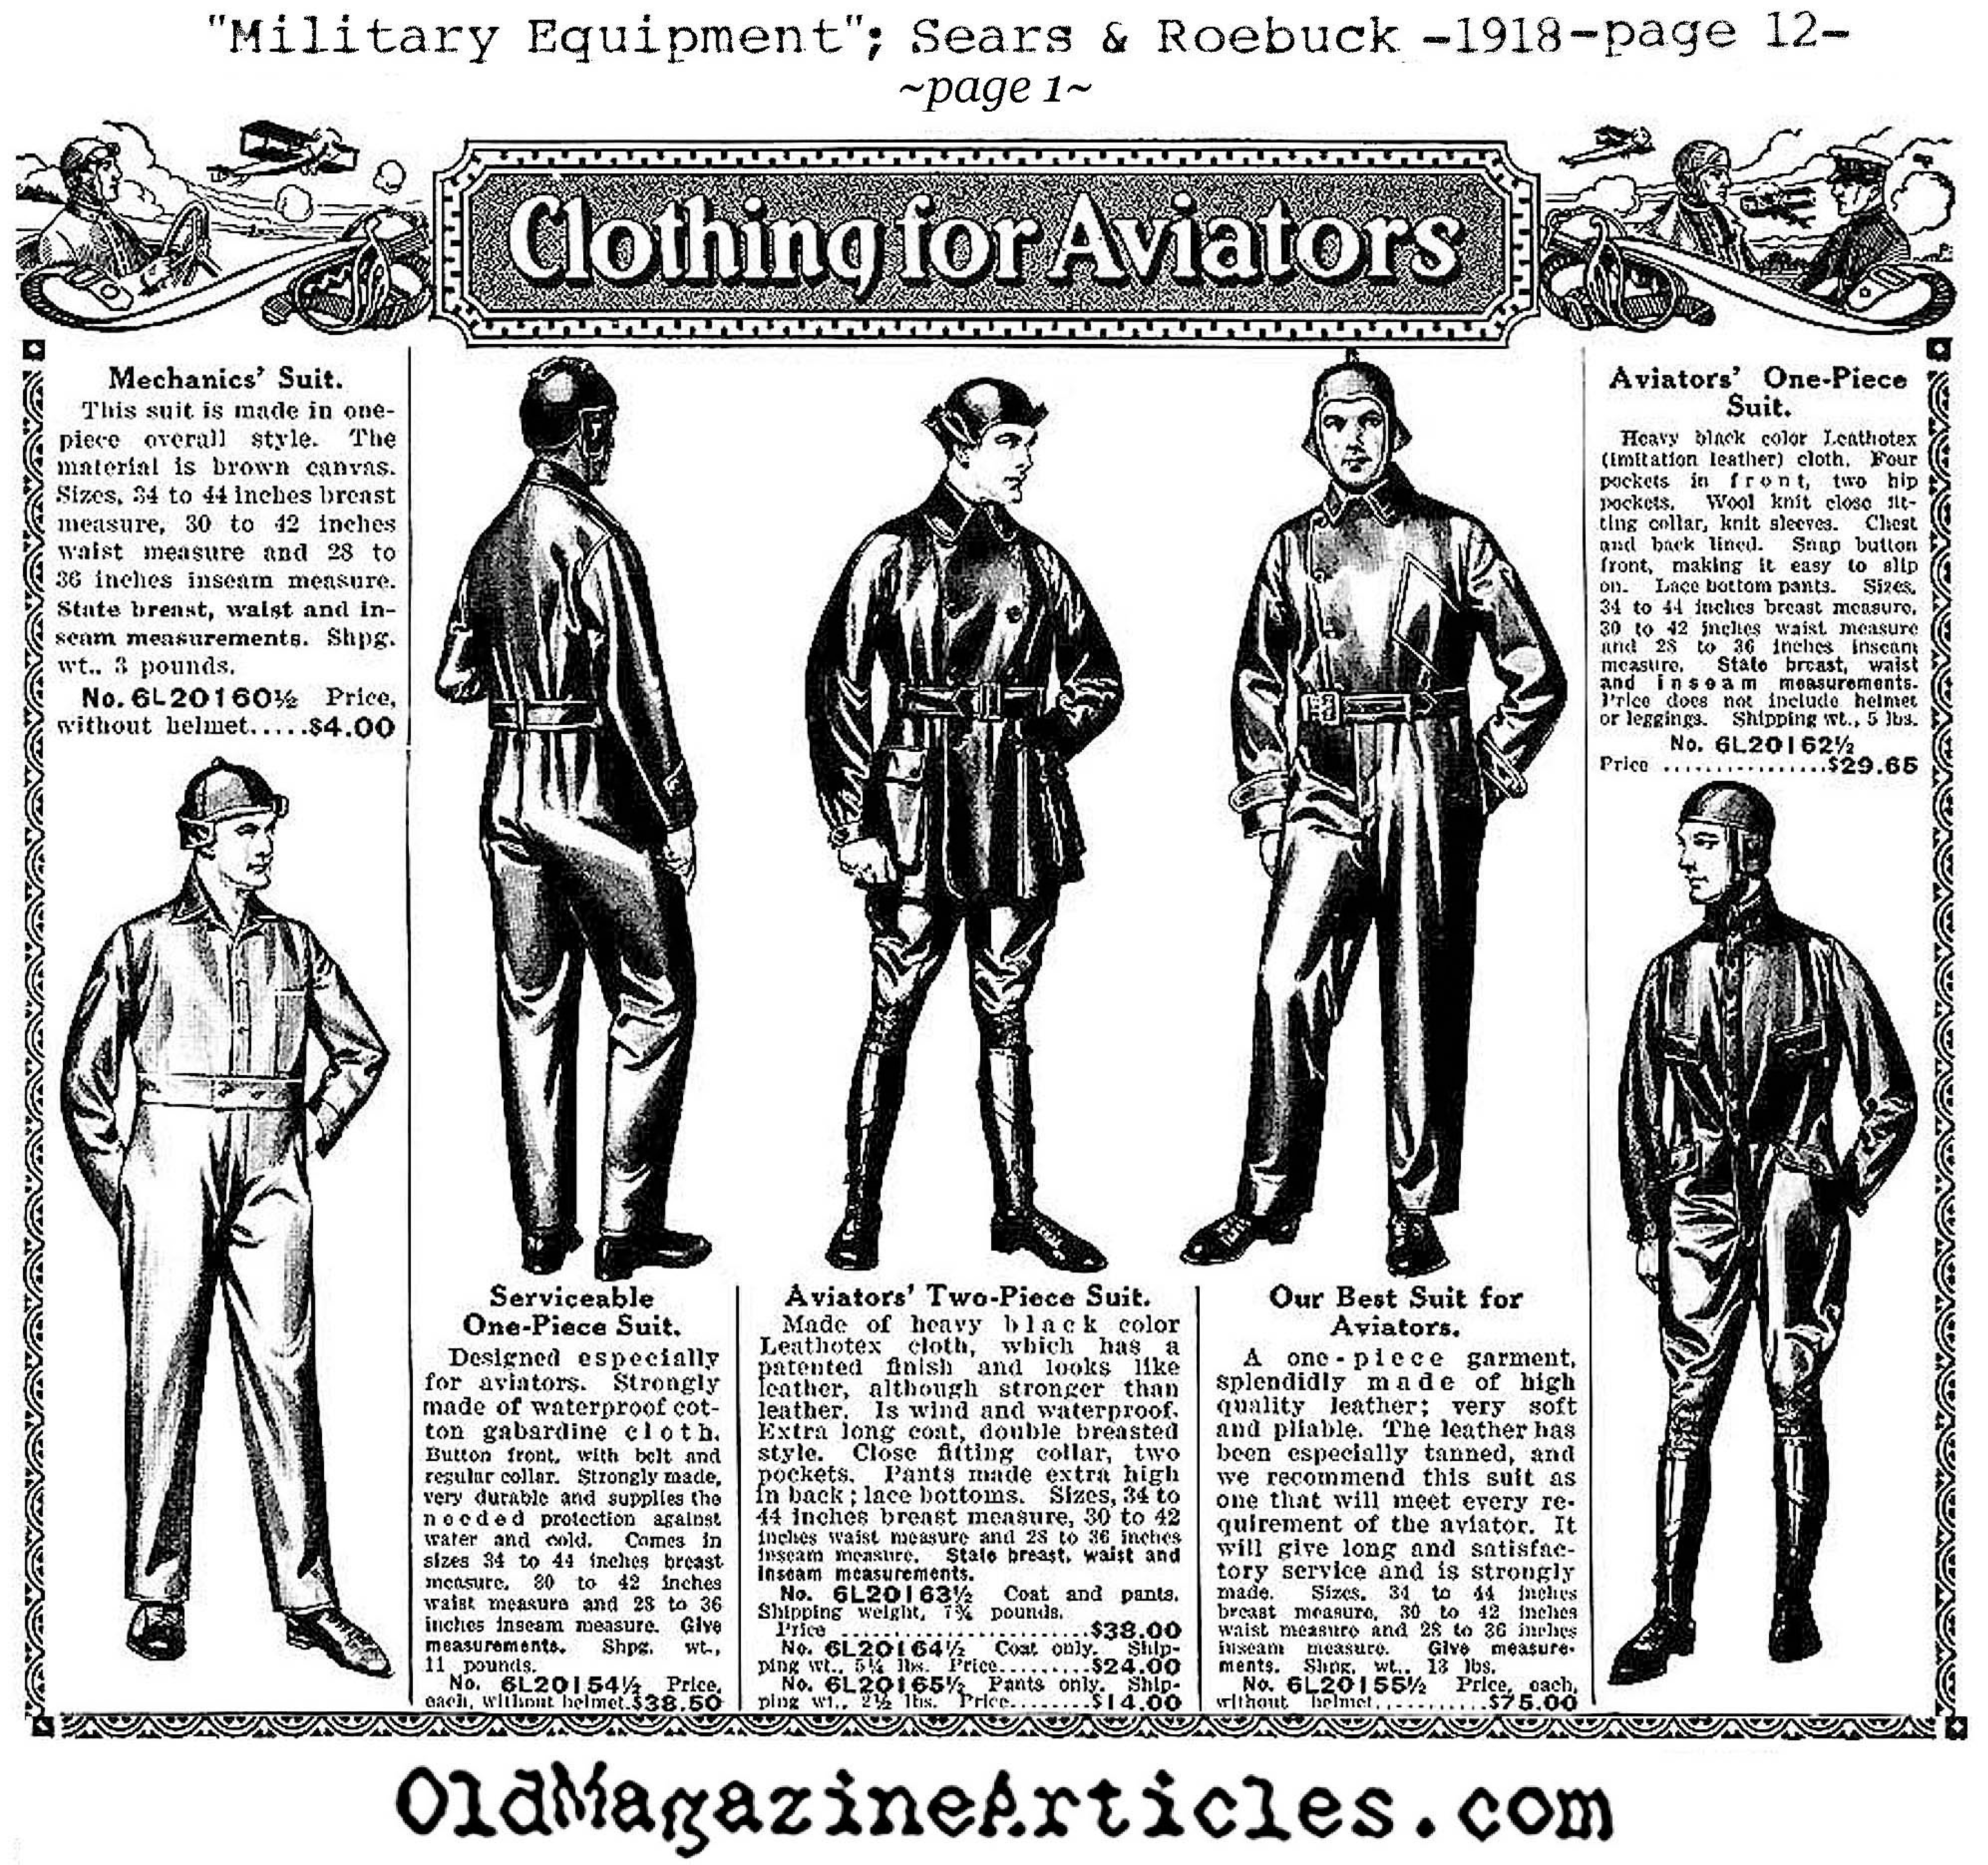 Clothing for Aviators (Sears and Roebuck, 1918)